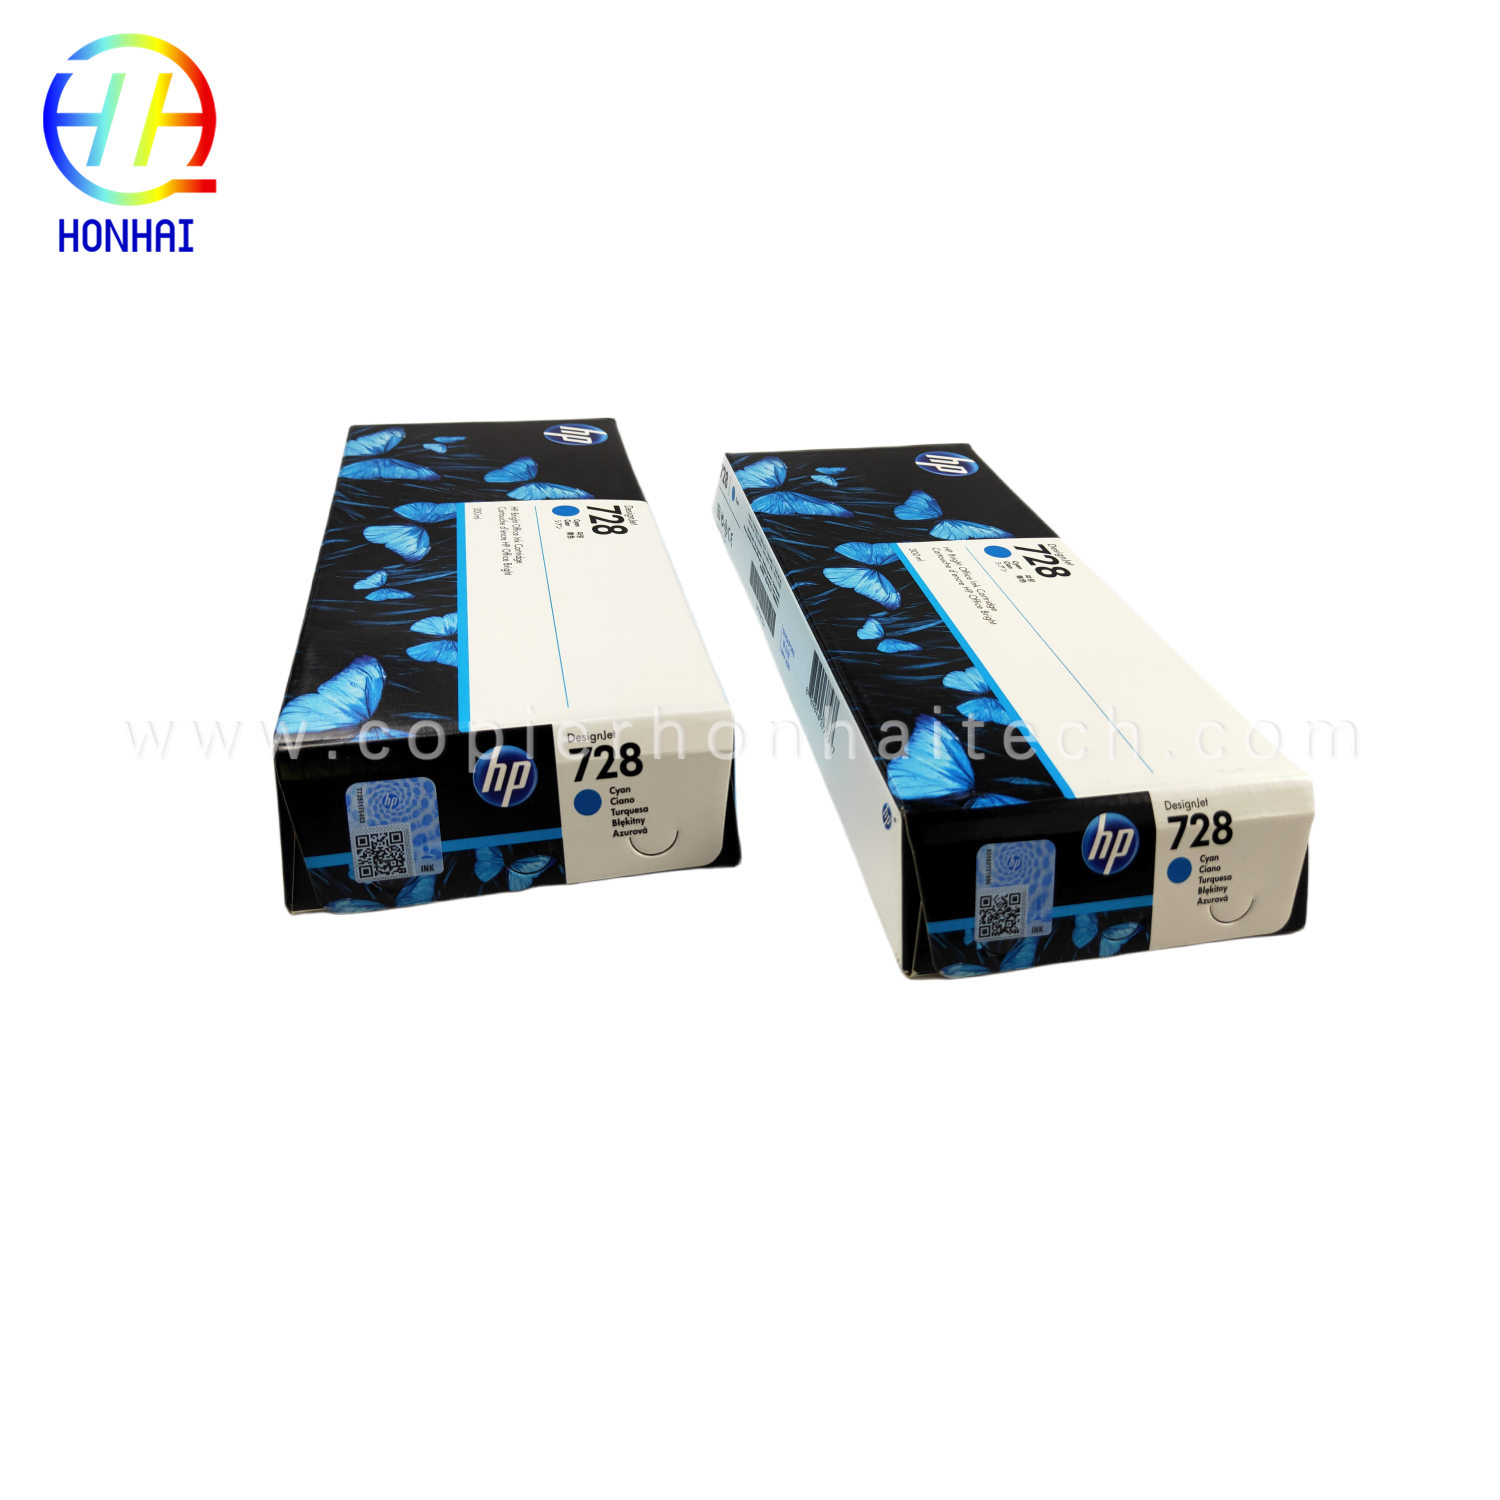 Original new Ink Cartridge Cyan for HP DesignJet T730 and T830 Large Format Plotter Printers and HP 729 DesignJet Printhead 728 F9K17A